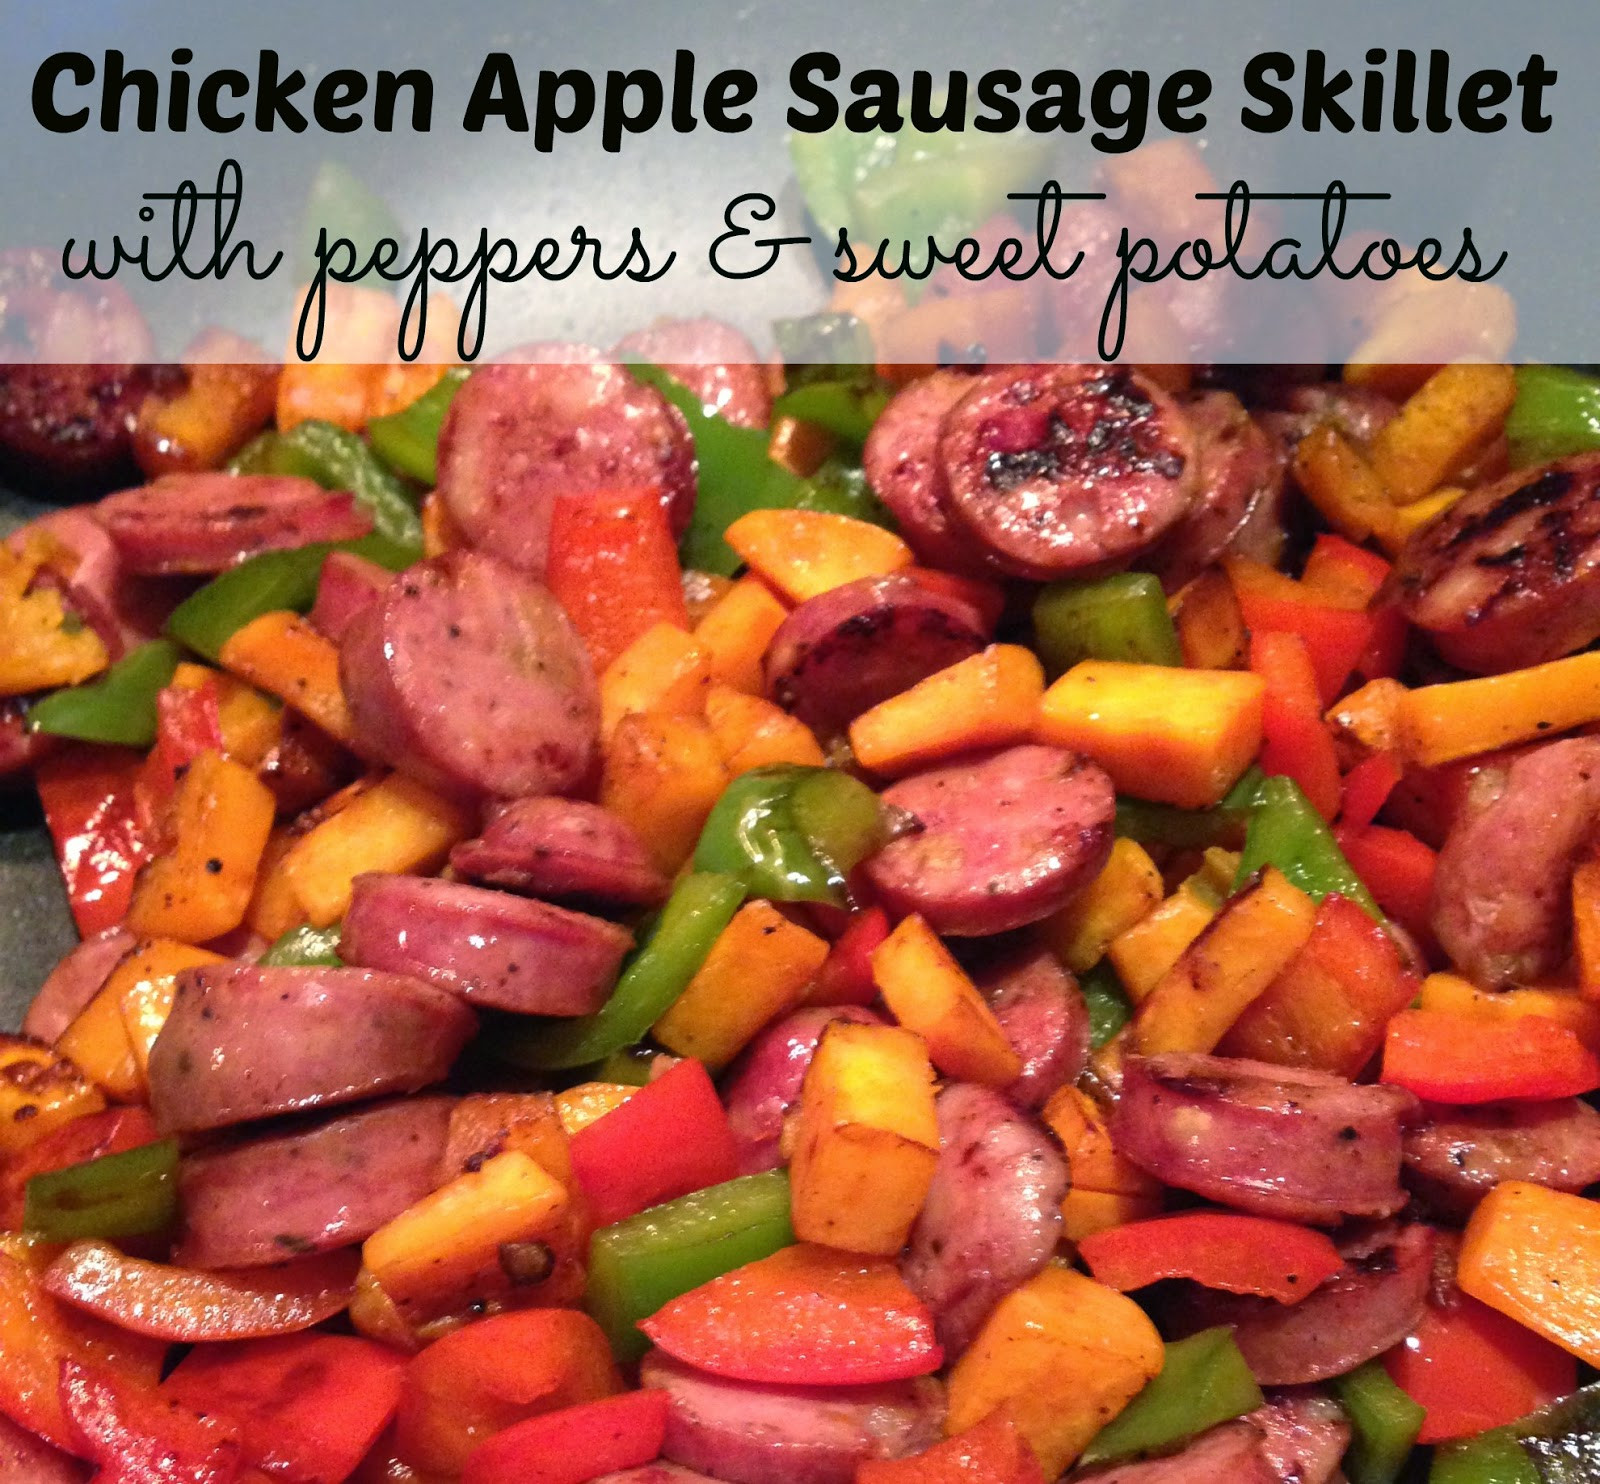 Chicken Apple Sausage Recipes
 simply made with love Chicken Apple Sausage Skillet II